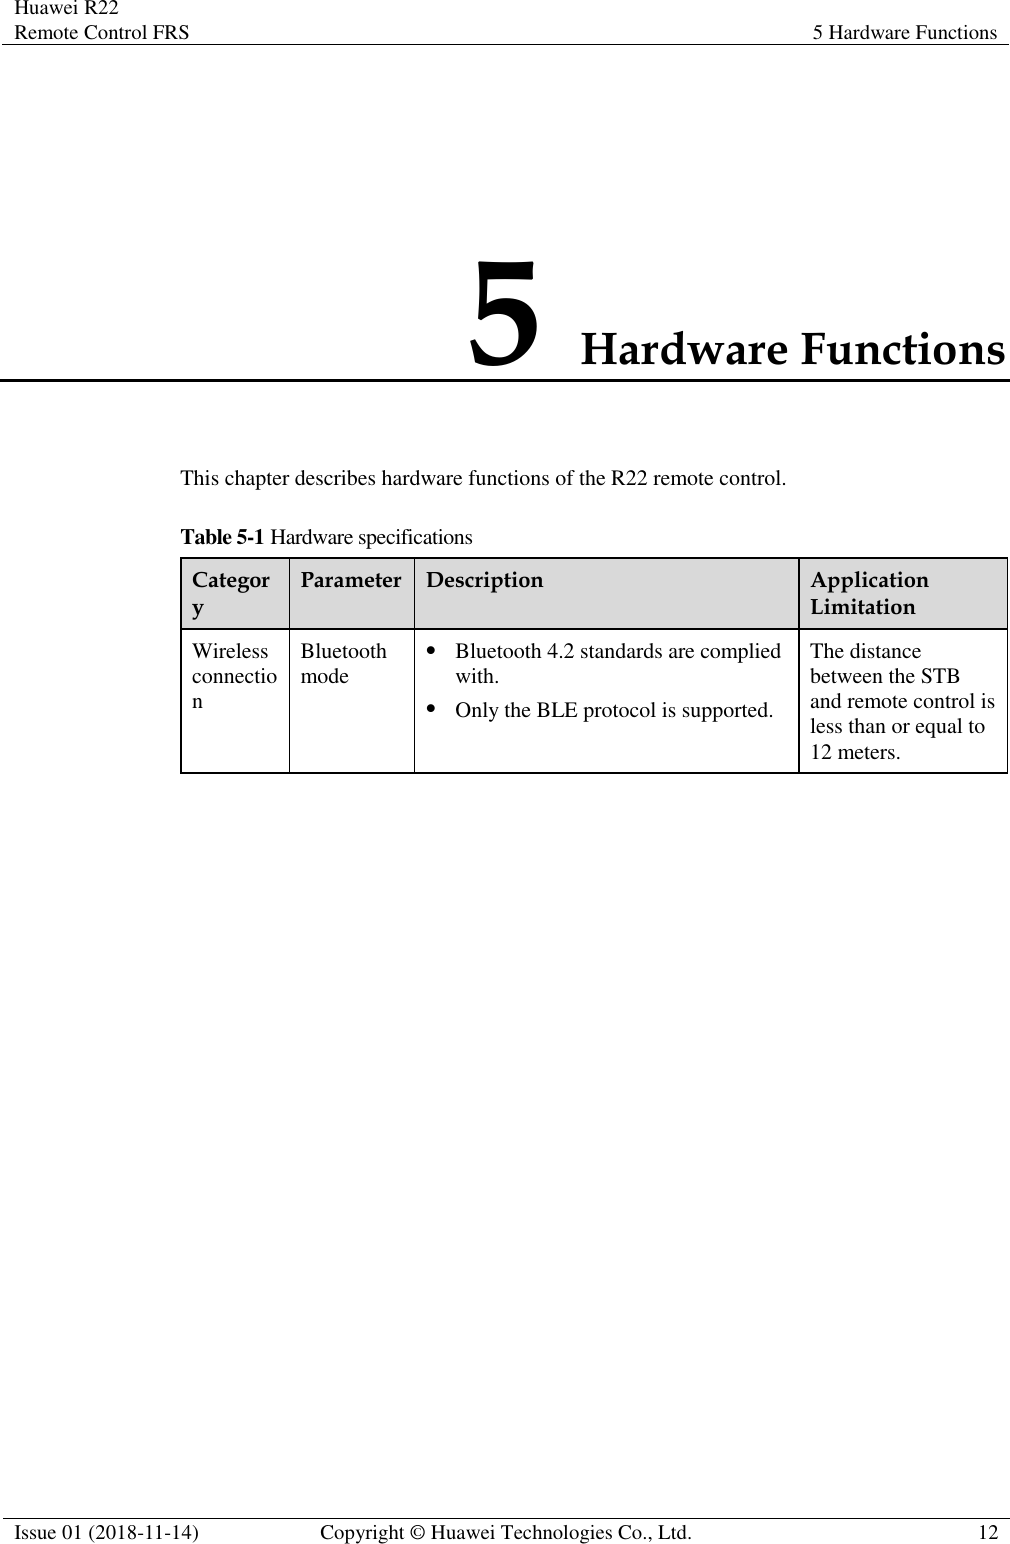 Huawei R22 Remote Control FRS 5 Hardware Functions  Issue 01 (2018-11-14) Copyright © Huawei Technologies Co., Ltd. 12  5 Hardware Functions This chapter describes hardware functions of the R22 remote control. Table 5-1 Hardware specifications Category Parameter Description Application Limitation Wireless connection Bluetooth mode ⚫ Bluetooth 4.2 standards are complied with. ⚫ Only the BLE protocol is supported. The distance between the STB and remote control is less than or equal to 12 meters. 